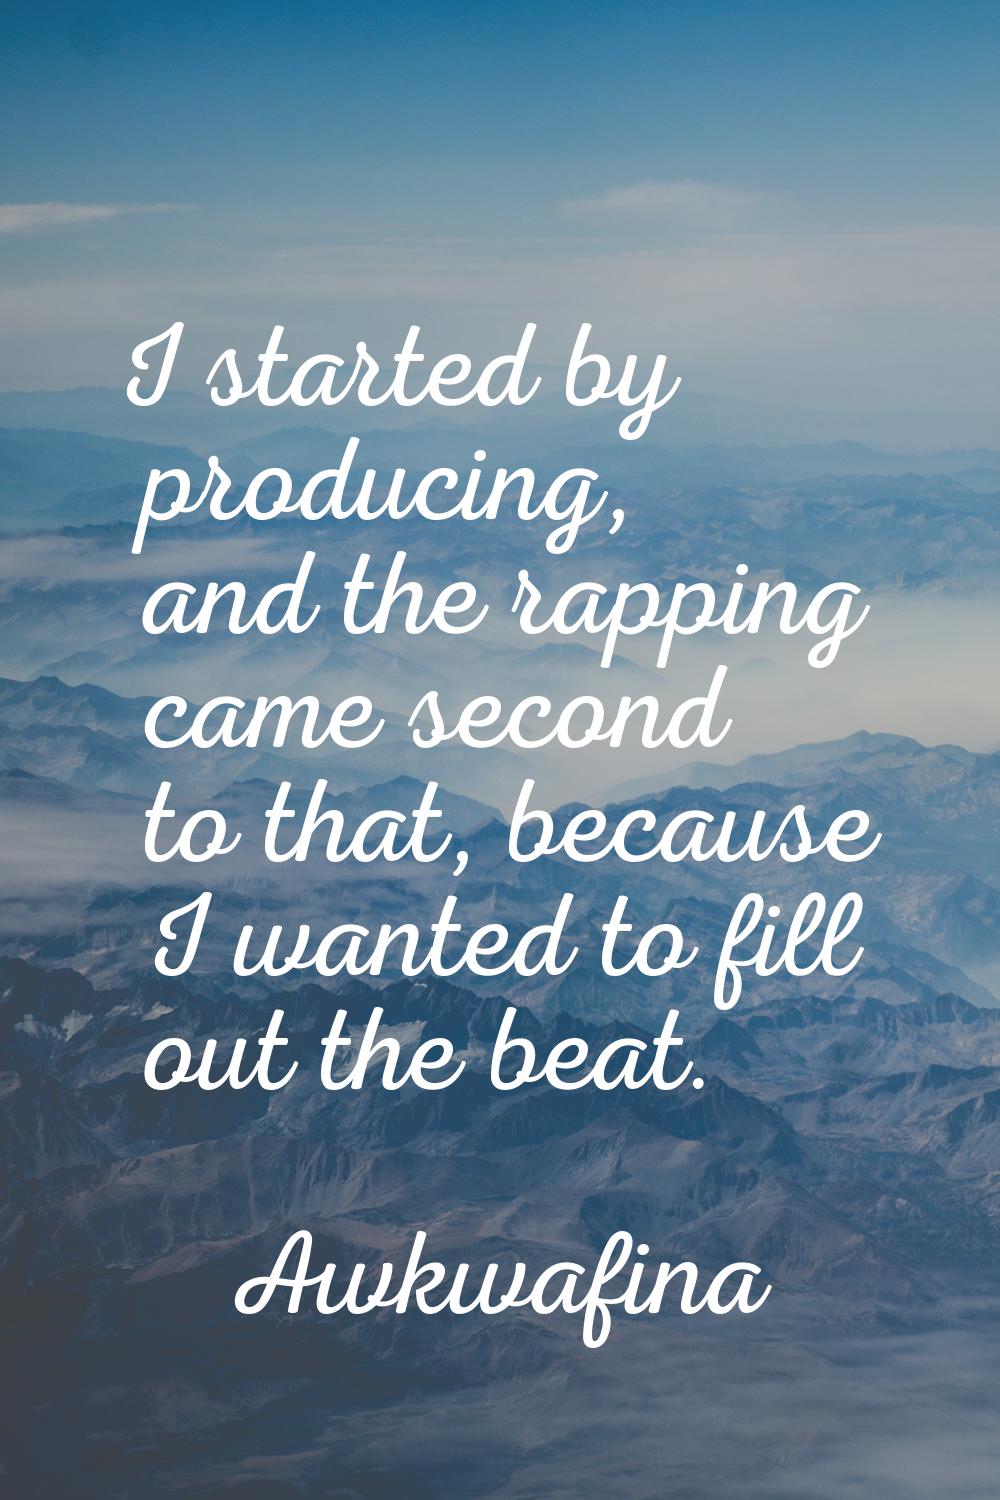 I started by producing, and the rapping came second to that, because I wanted to fill out the beat.